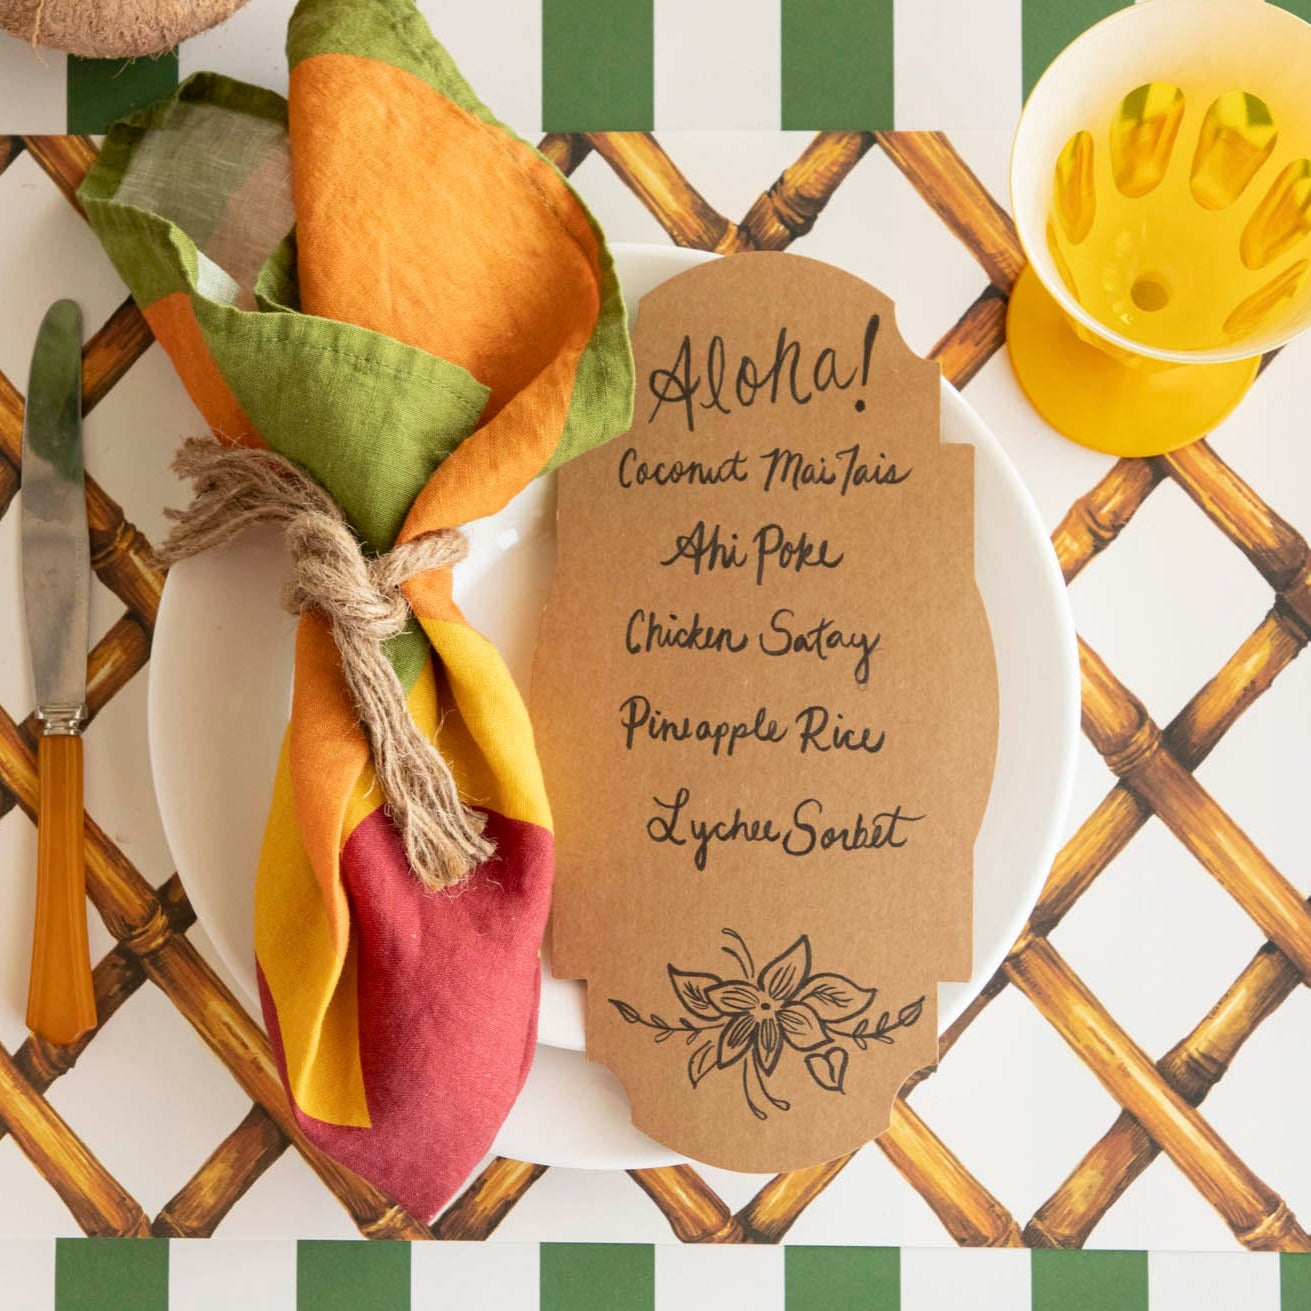 The Bamboo Lattice Placemat under a tropical themed place setting. 